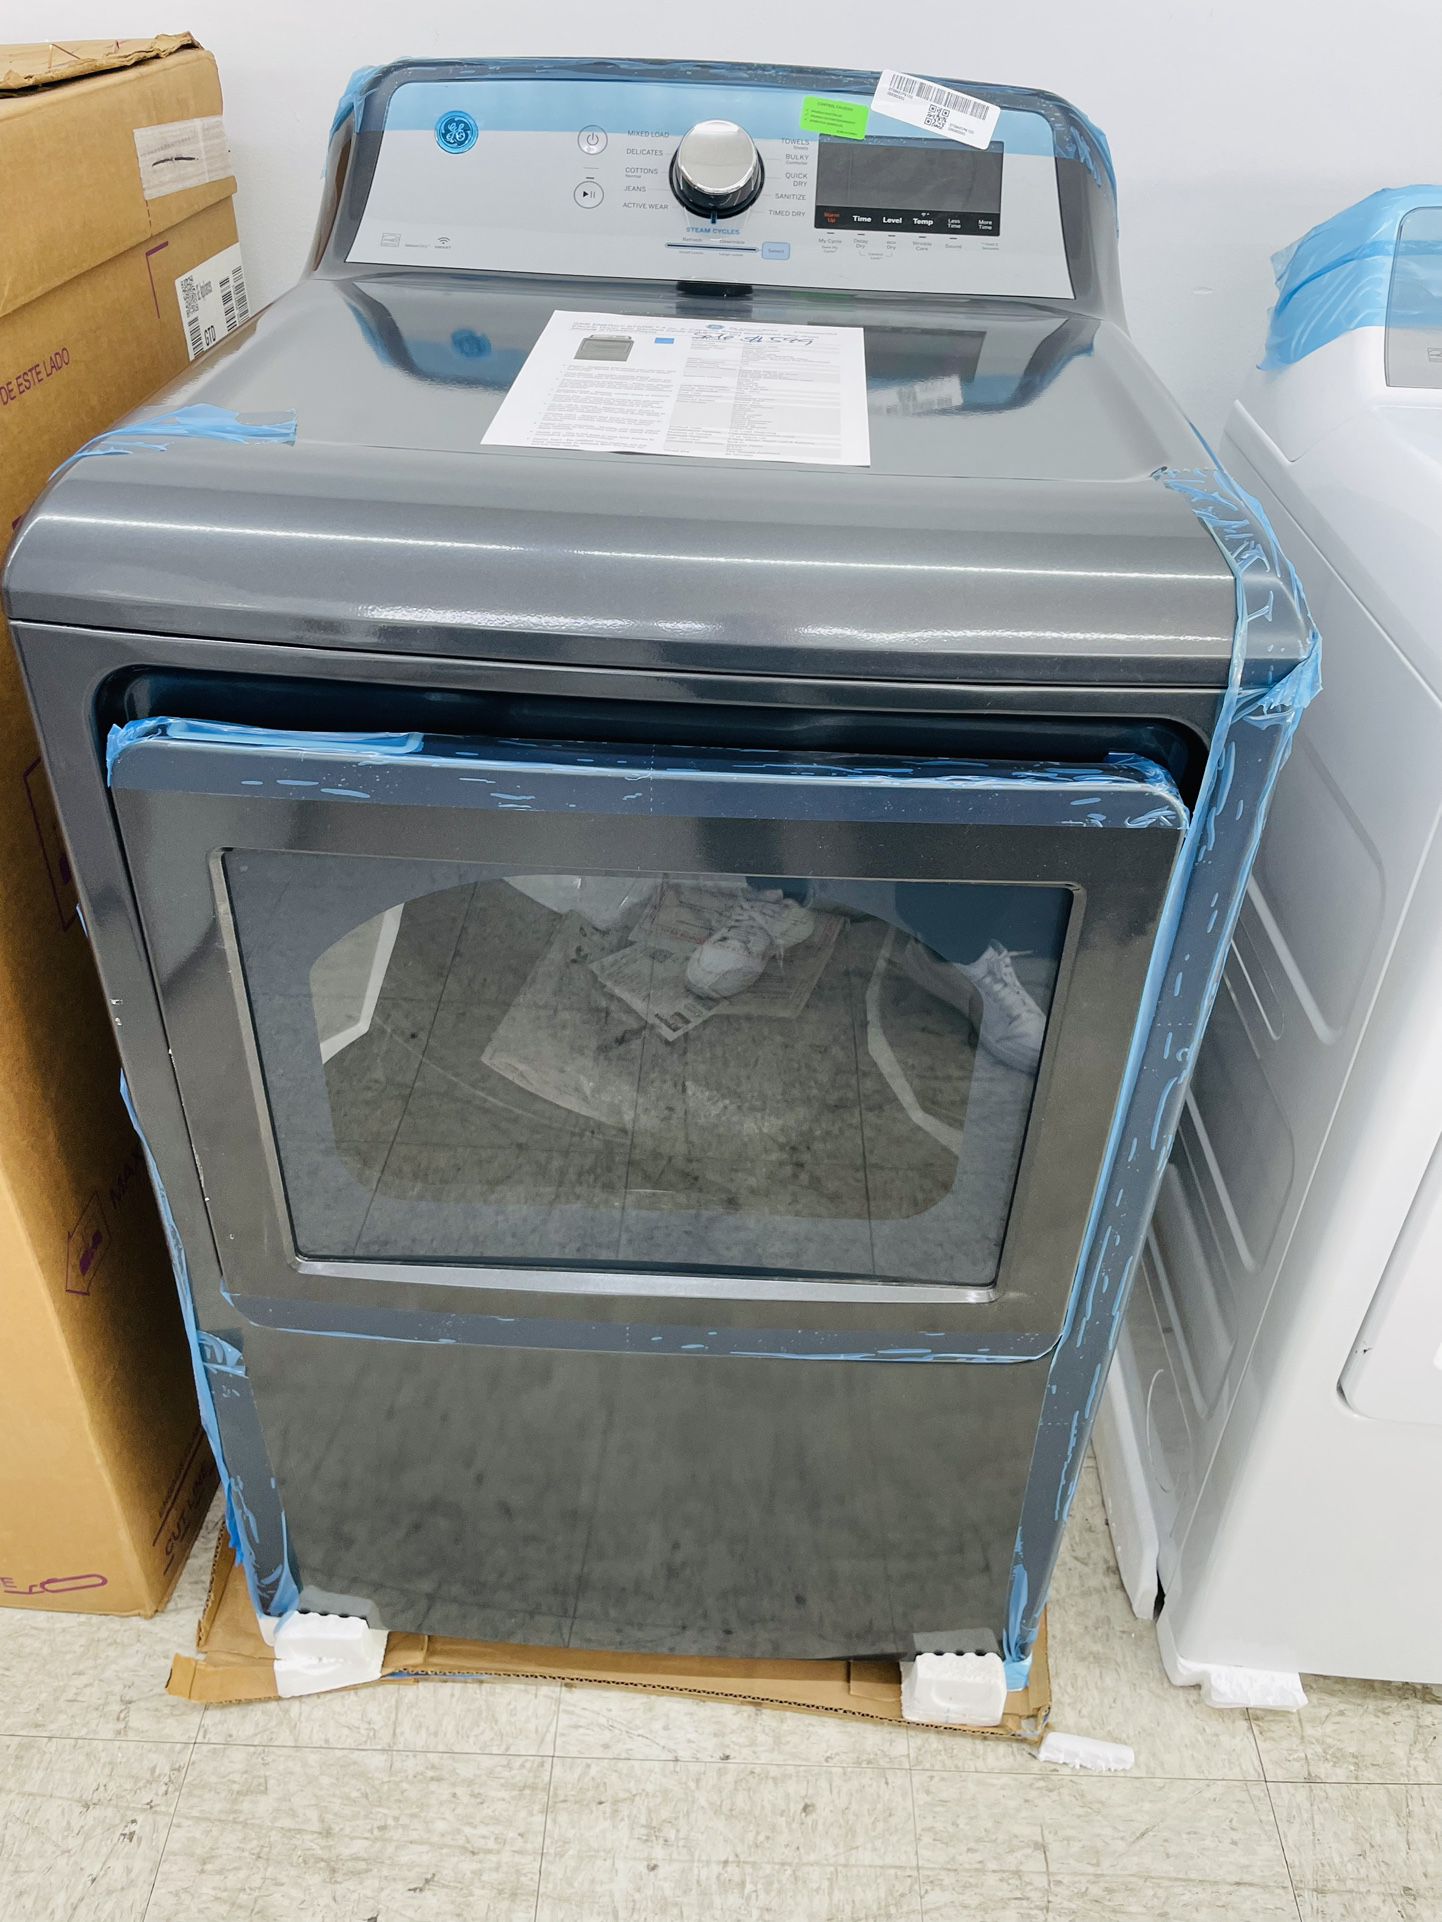 🔥🔥27” GE The Electric Dryer